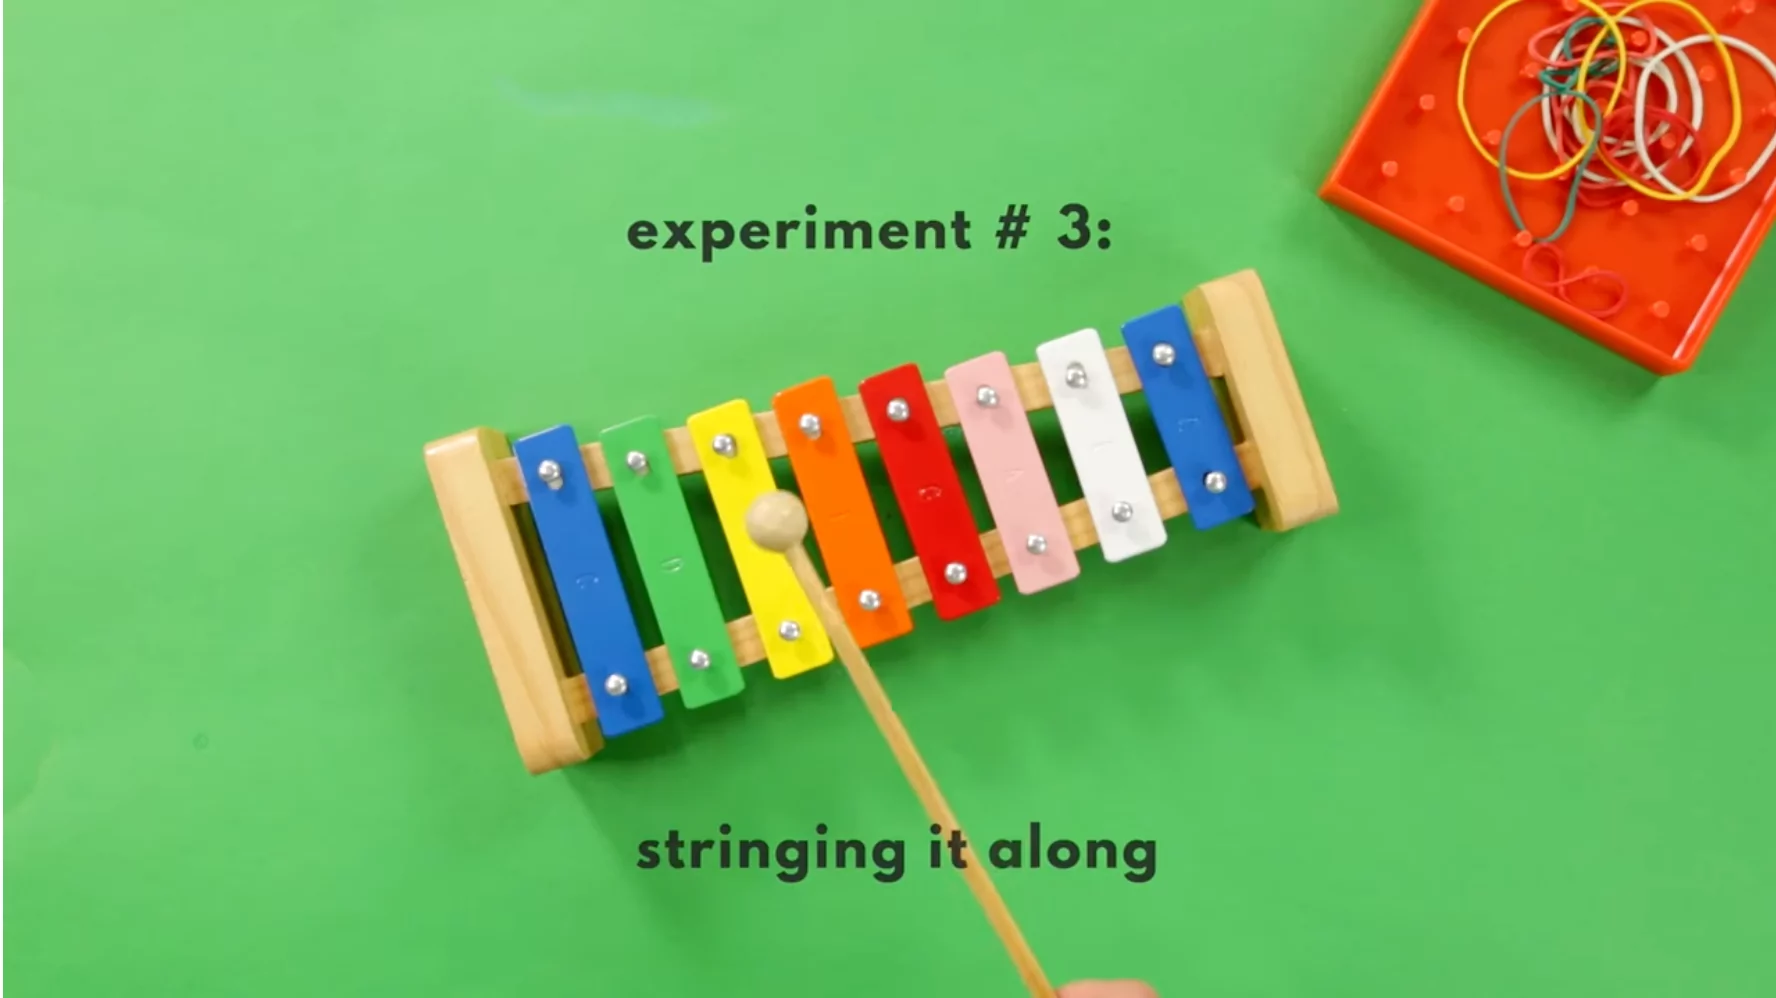 Science experiments for kids